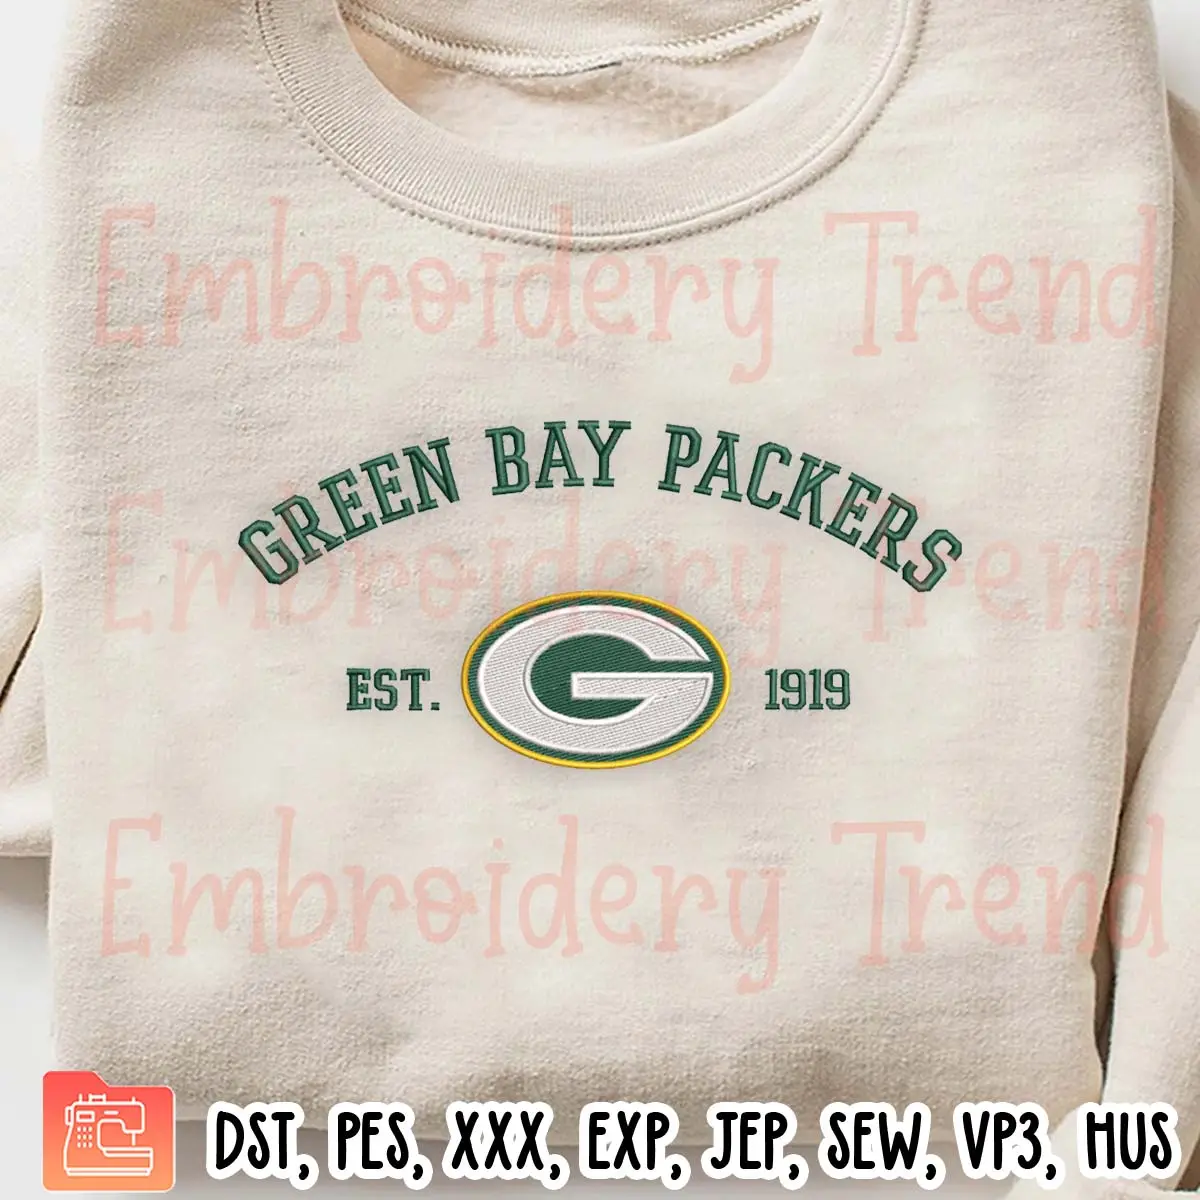 Green Bay Packers Est 1919 Embroidery Design, NFL American Football Embroidery Digitizing Pes File